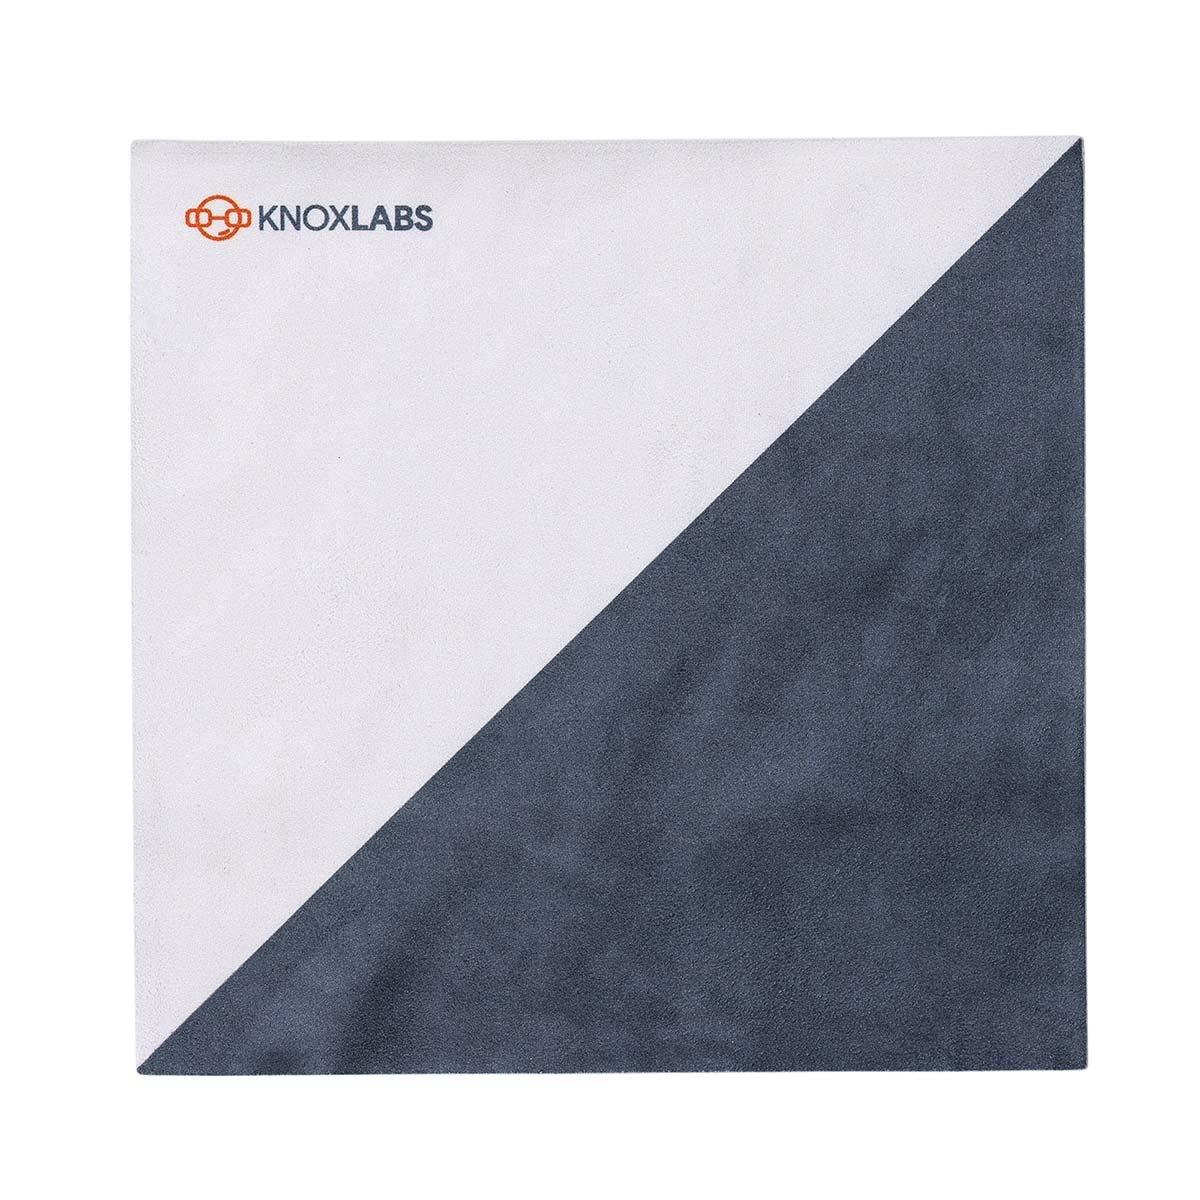 Knoxlabs Microfiber Cleaning Cloth for VR HMD Lenses